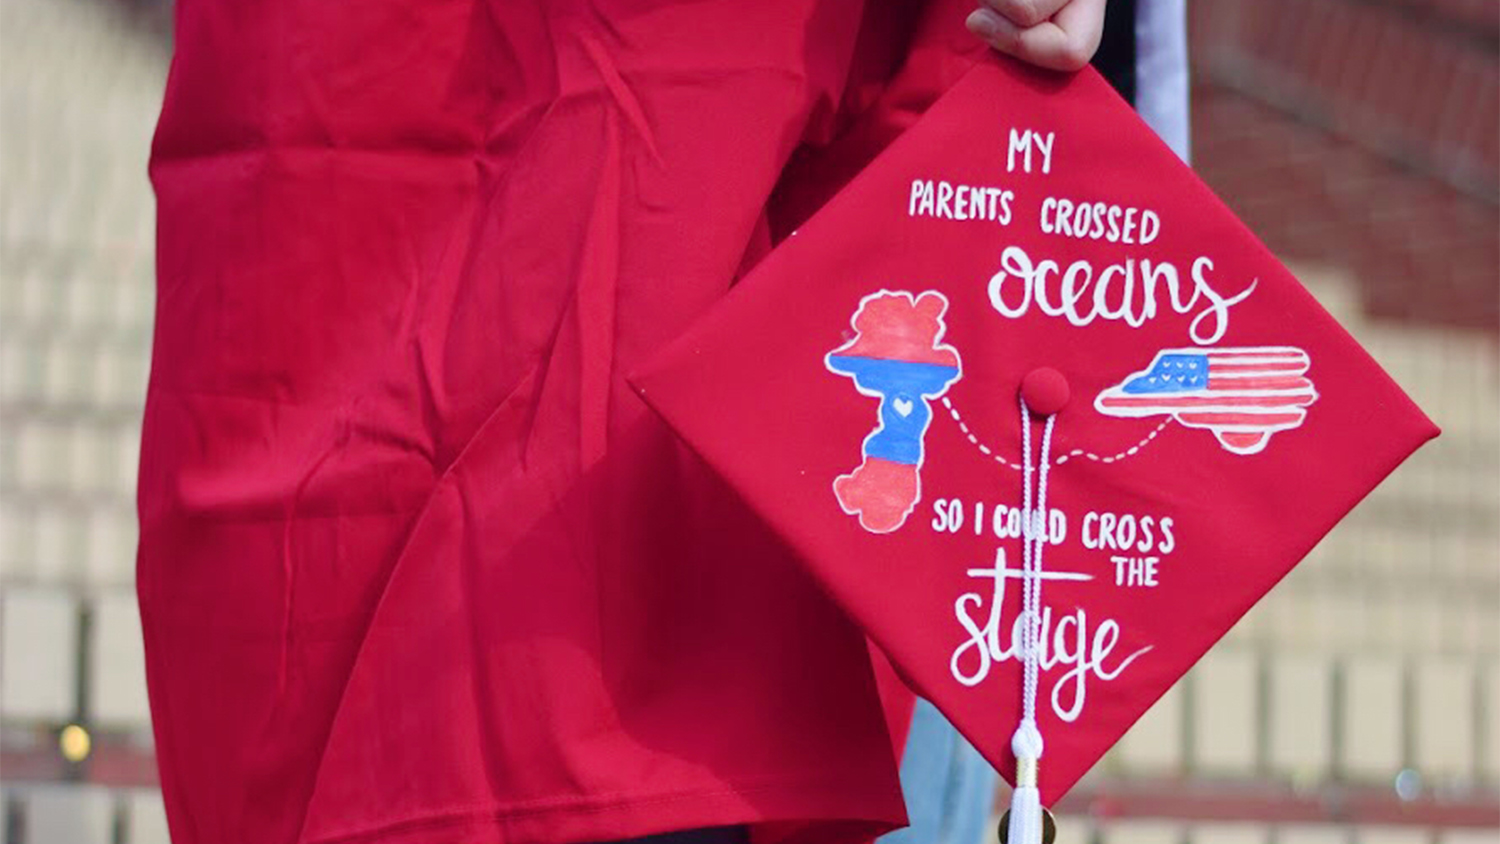 A graduation cap that reads "My grandparents crossed oceans so I could cross the stage"